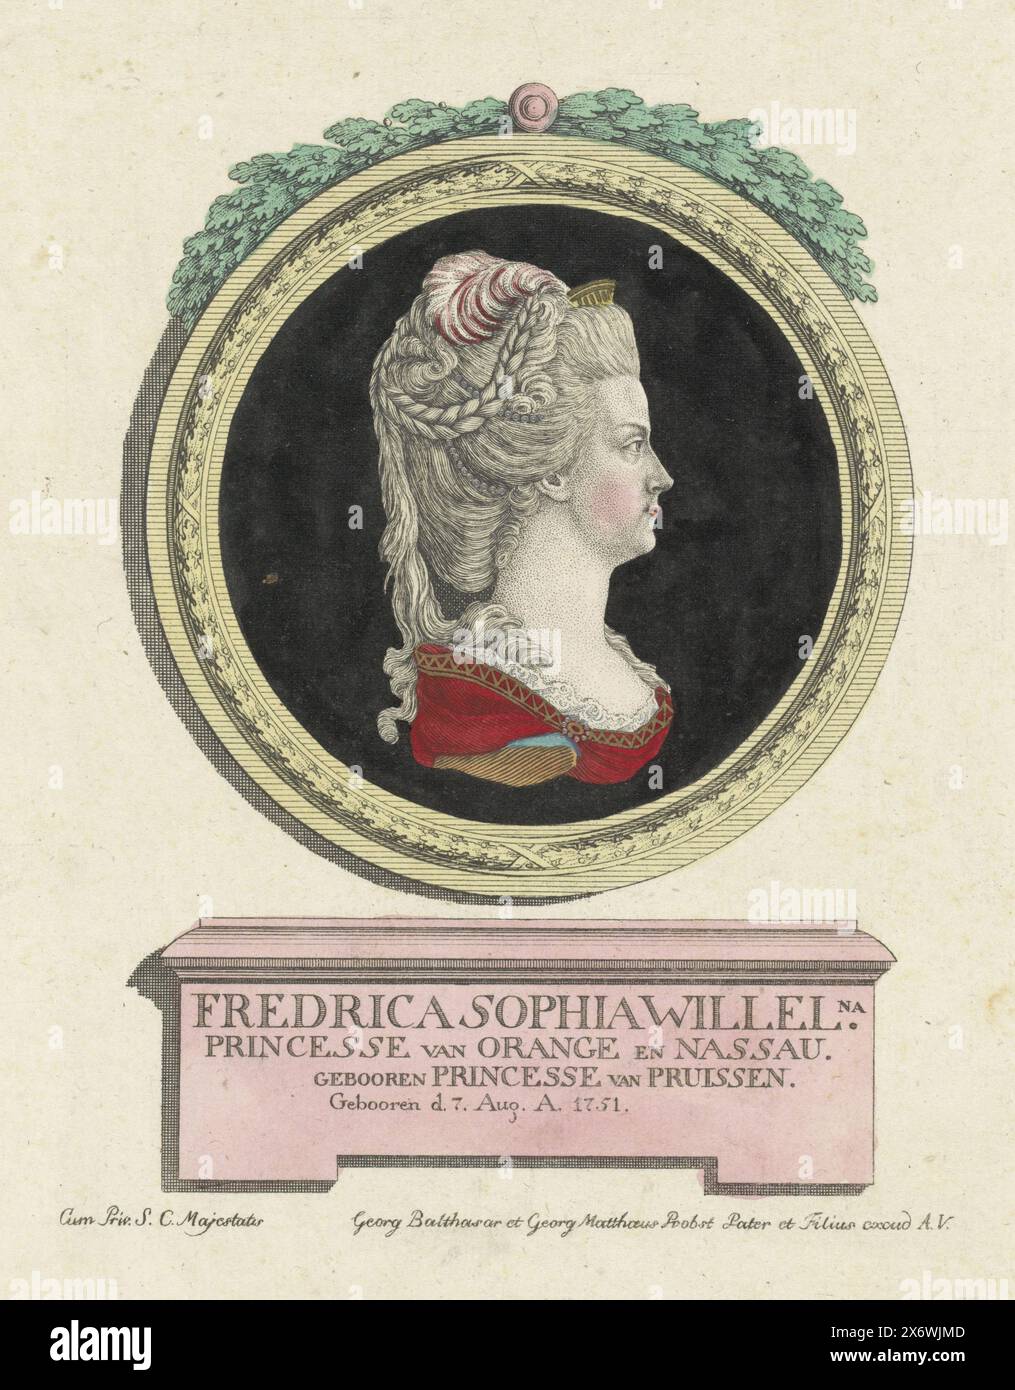 Portrait of Wilhelmina of Prussia, Portrait of Wilhelmina in an ornamented circle. On a pedestal her name, her titles and her date of birth., print, print maker: anonymous, publisher: Georg Balthasar Probst, (mentioned on object), publisher: Georg Mathäus Probst, (mentioned on object), print maker: Low Countries, publisher: Northern Netherlands, publisher: Low Countries, c. 1780 - 1788, paper, engraving, etching, height, 218 mm × width, 176 mm Stock Photo